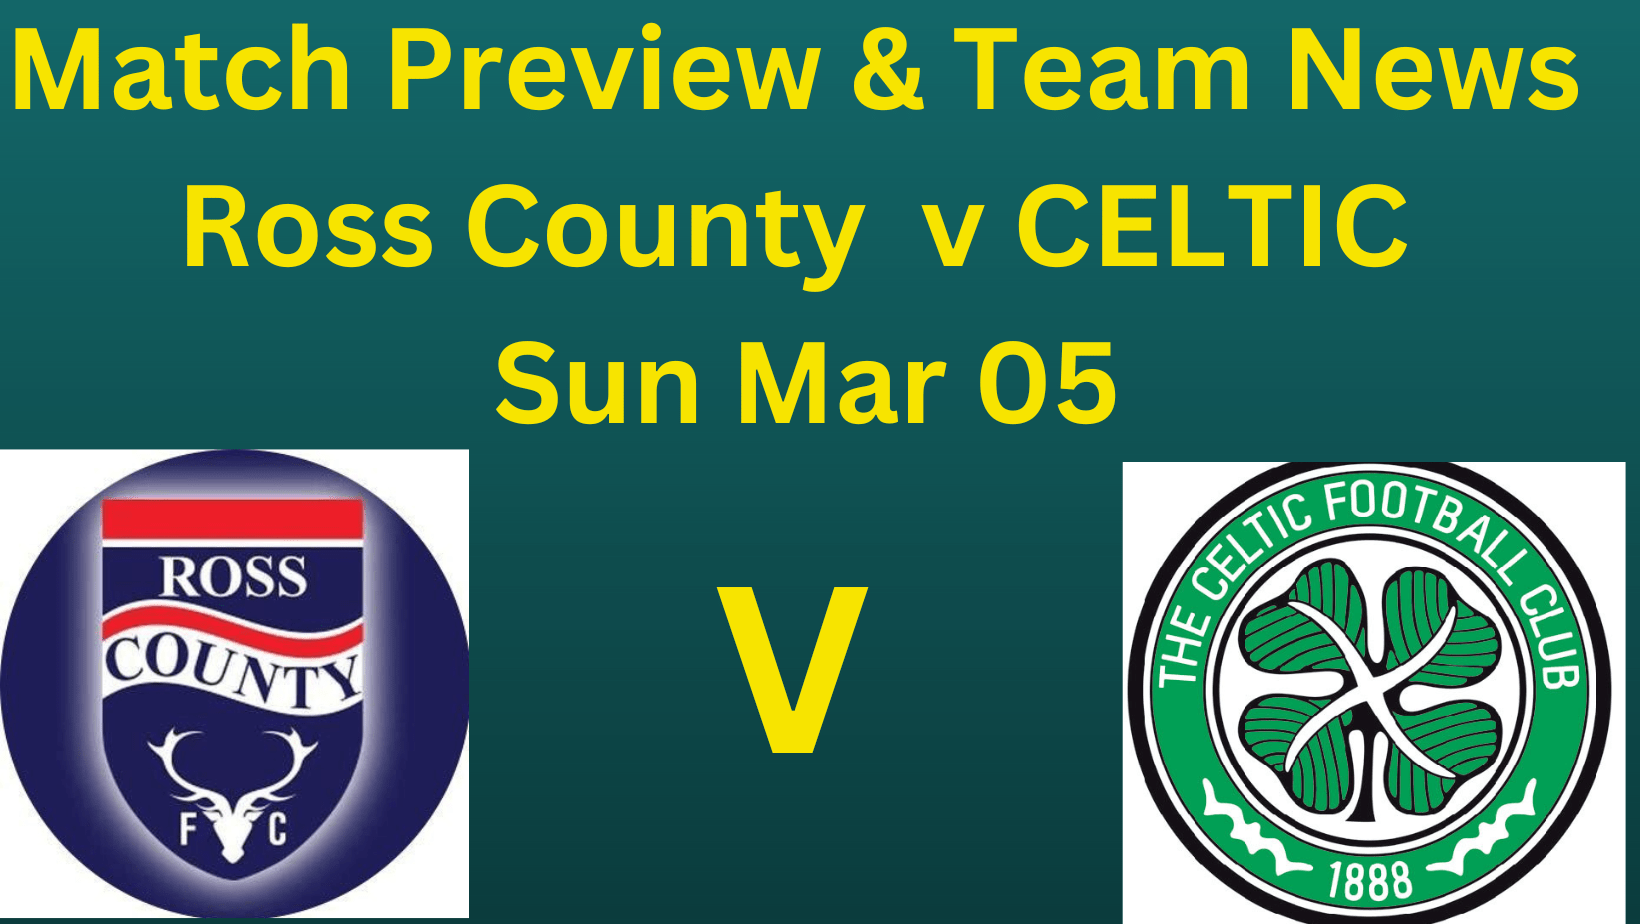 Match Preview and Team News